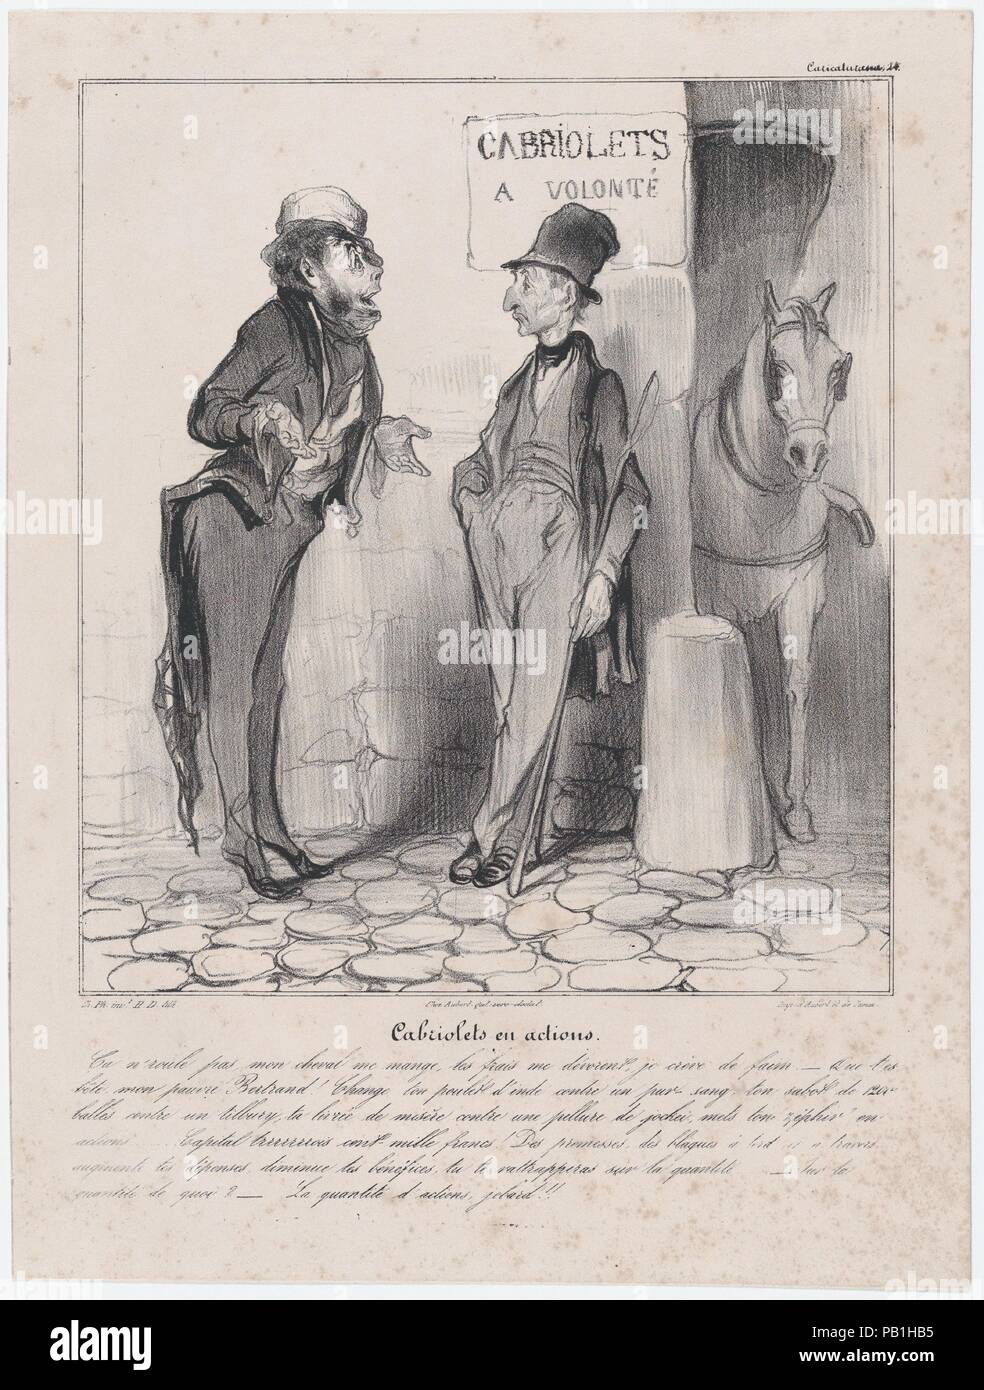 Plate 24: Gigs in action, from 'Caricaturana,' published in Les Robert Macaires. Artist: Honoré Daumier (French, Marseilles 1808-1879 Valmondois). Author: Charles Philipon (French, Lyons 1800-1862 Paris). Dimensions: Image: 9 5/8 × 8 1/2 in. (24.4 × 21.6 cm)  Sheet: 13 7/16 × 10 1/16 in. (34.1 × 25.6 cm). Printer: Aubert et Cie; Junca. Publisher: Aubert et Cie. Series/Portfolio: 'Caricaturana'. Date: 1838.  - Cabriolets and a share in horse business. It just won't run, my horse eats me alive, my costs devour me, I'm dying of hunger.   - Poor old Bertrand, you really are stupid. Change your old Stock Photo